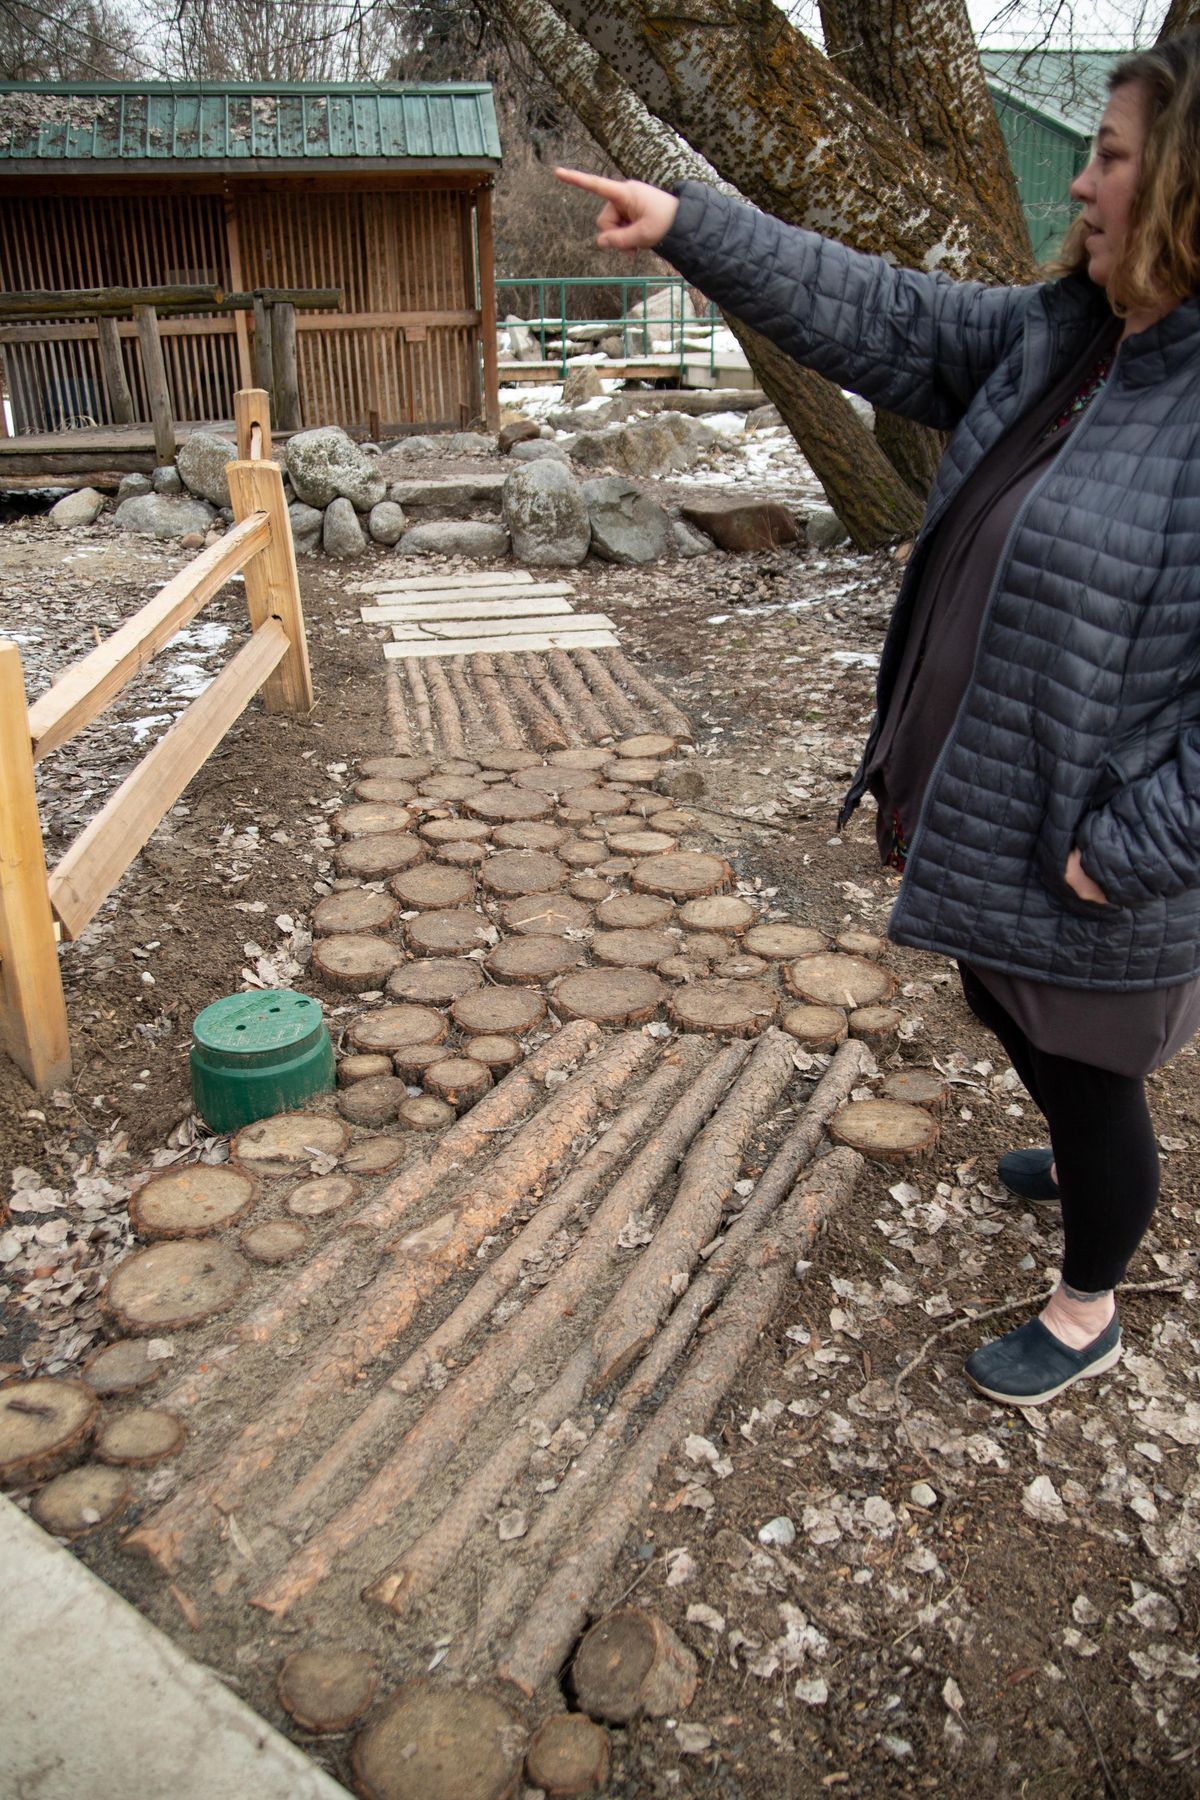 Jami Ostby Marsh, director at the West Valley Outdoor Learning Center, describes how children utilize a newly constructed trail area on Monday, Jan. 28, 2019. (Libby Kamrowski / The Spokesman-Review)